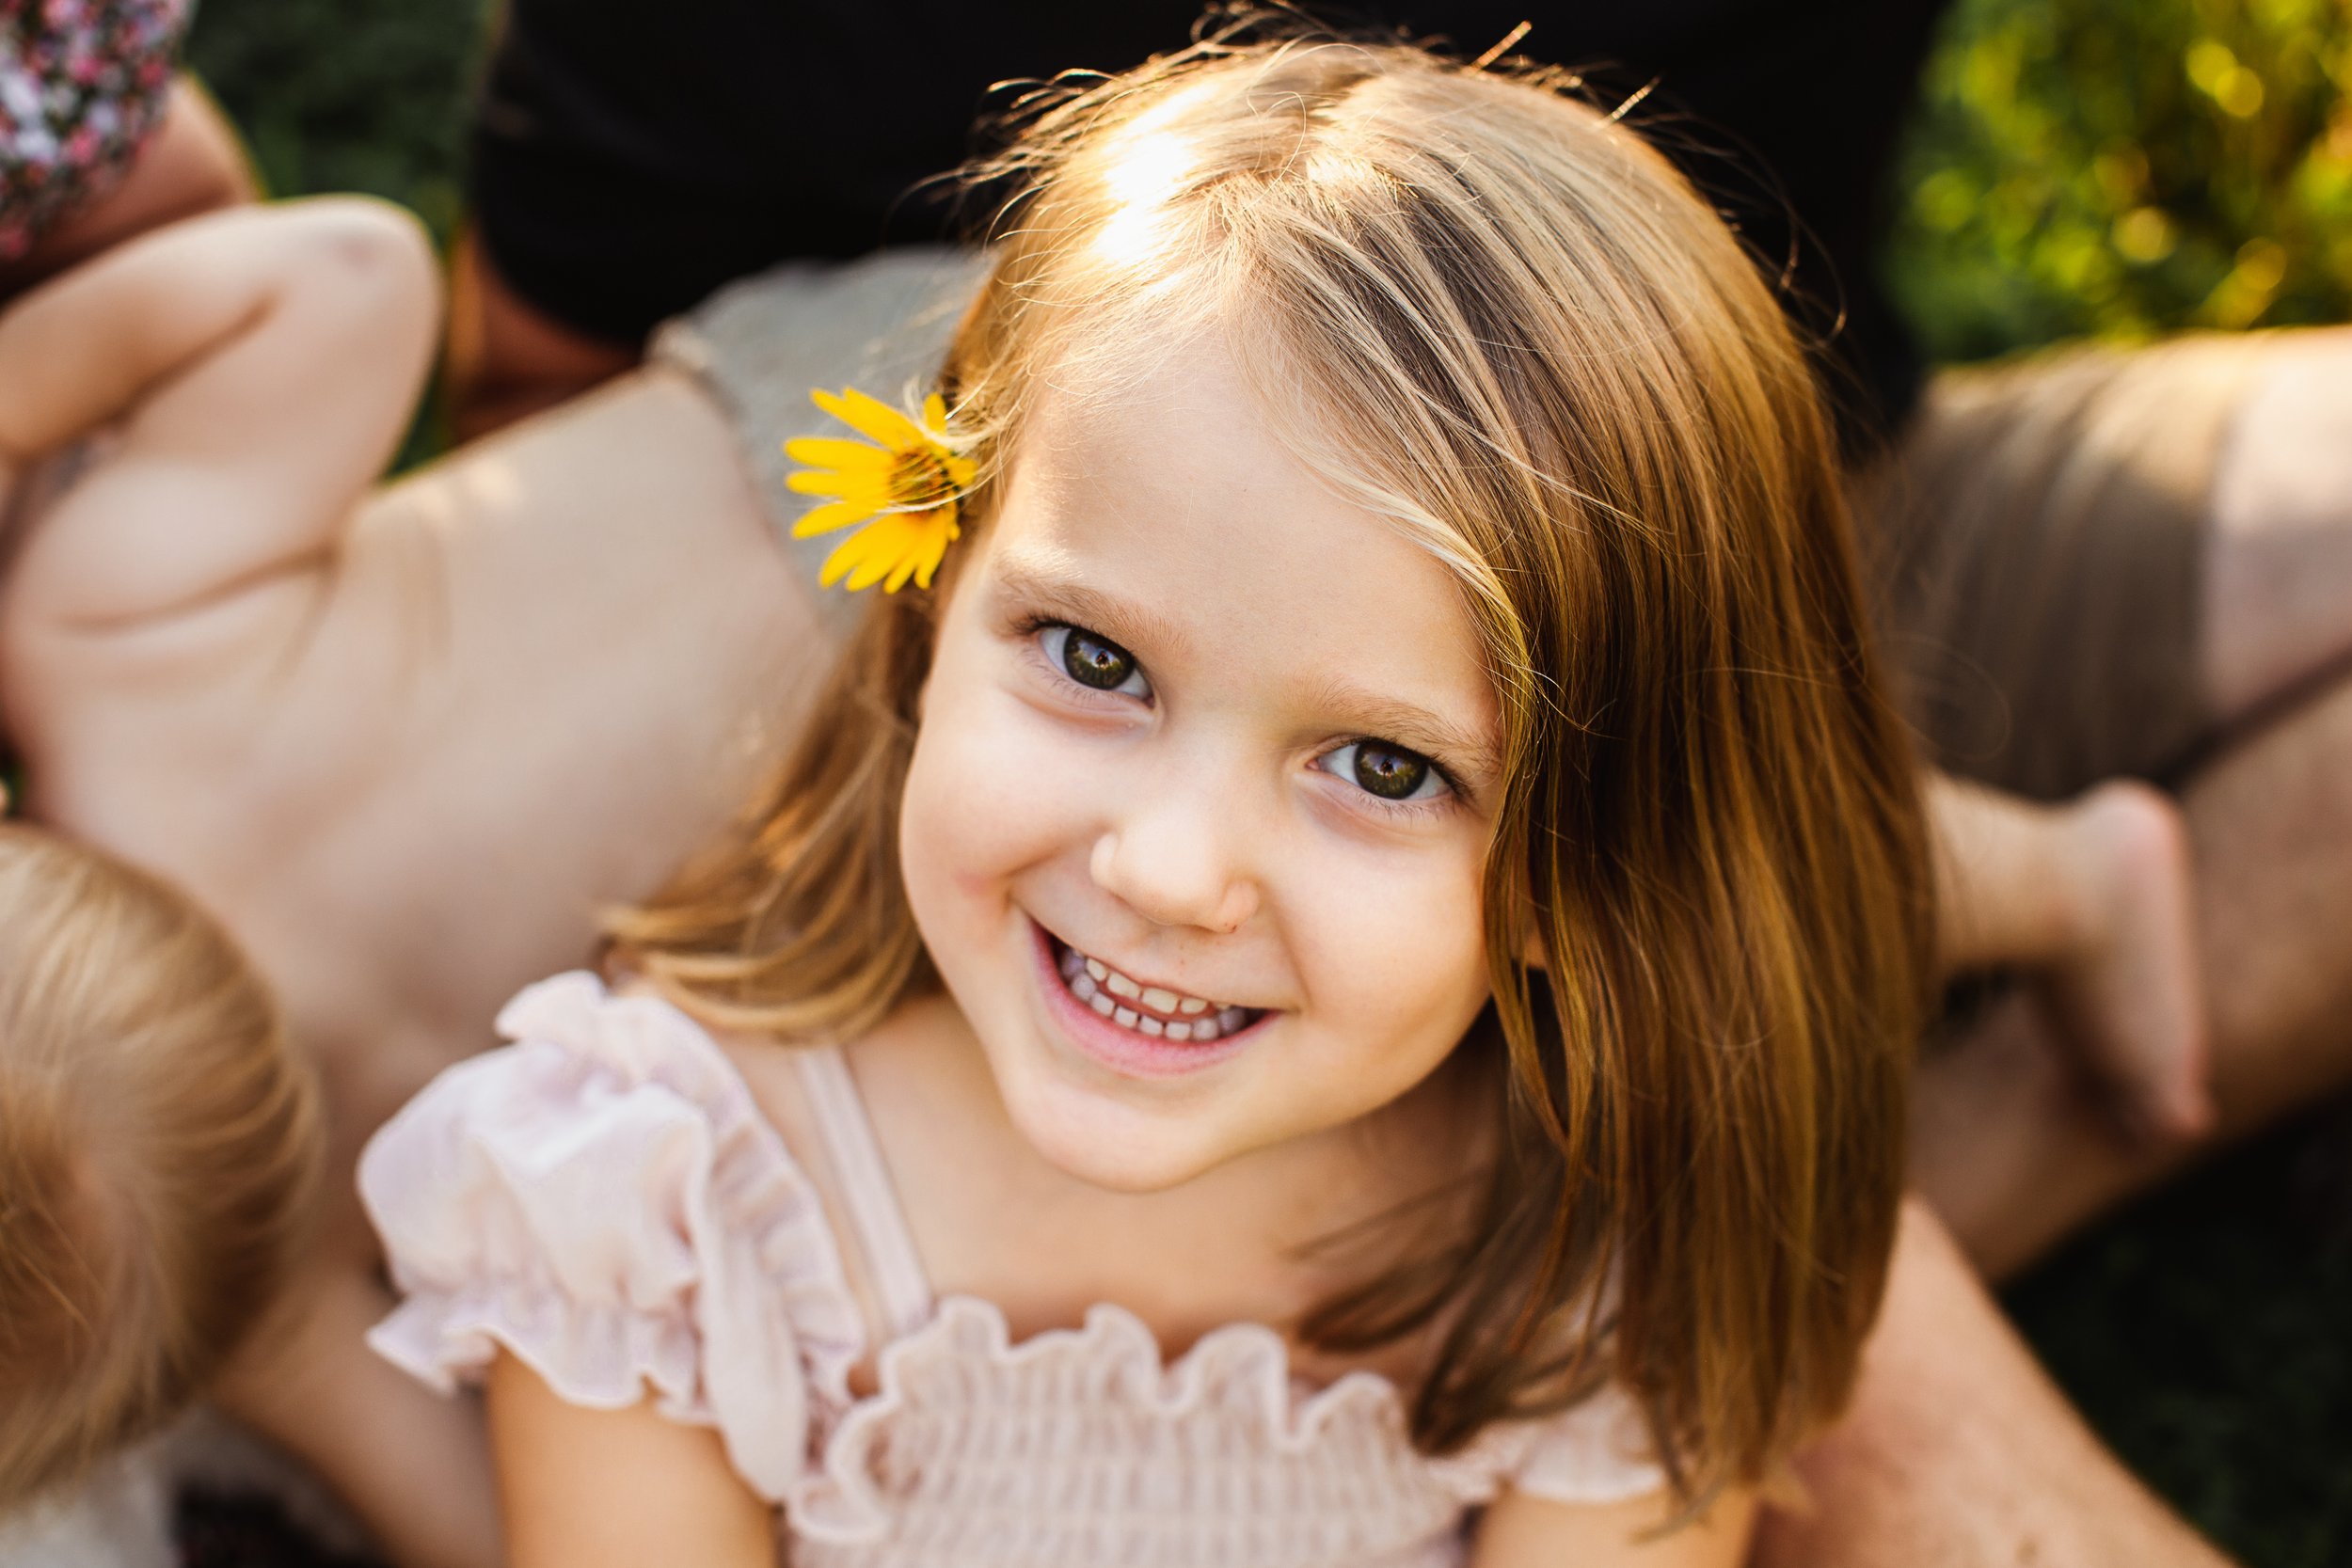  Teala Ward Photography captures a portrait of a toddler girl with a yellow flower tucked behind her ear. Little girl portraits #TealaWardPhotography #TealaWardFamilies #IllinoisRiverPhotography #IllinoisFamilyPhotography #familylifestylepics 